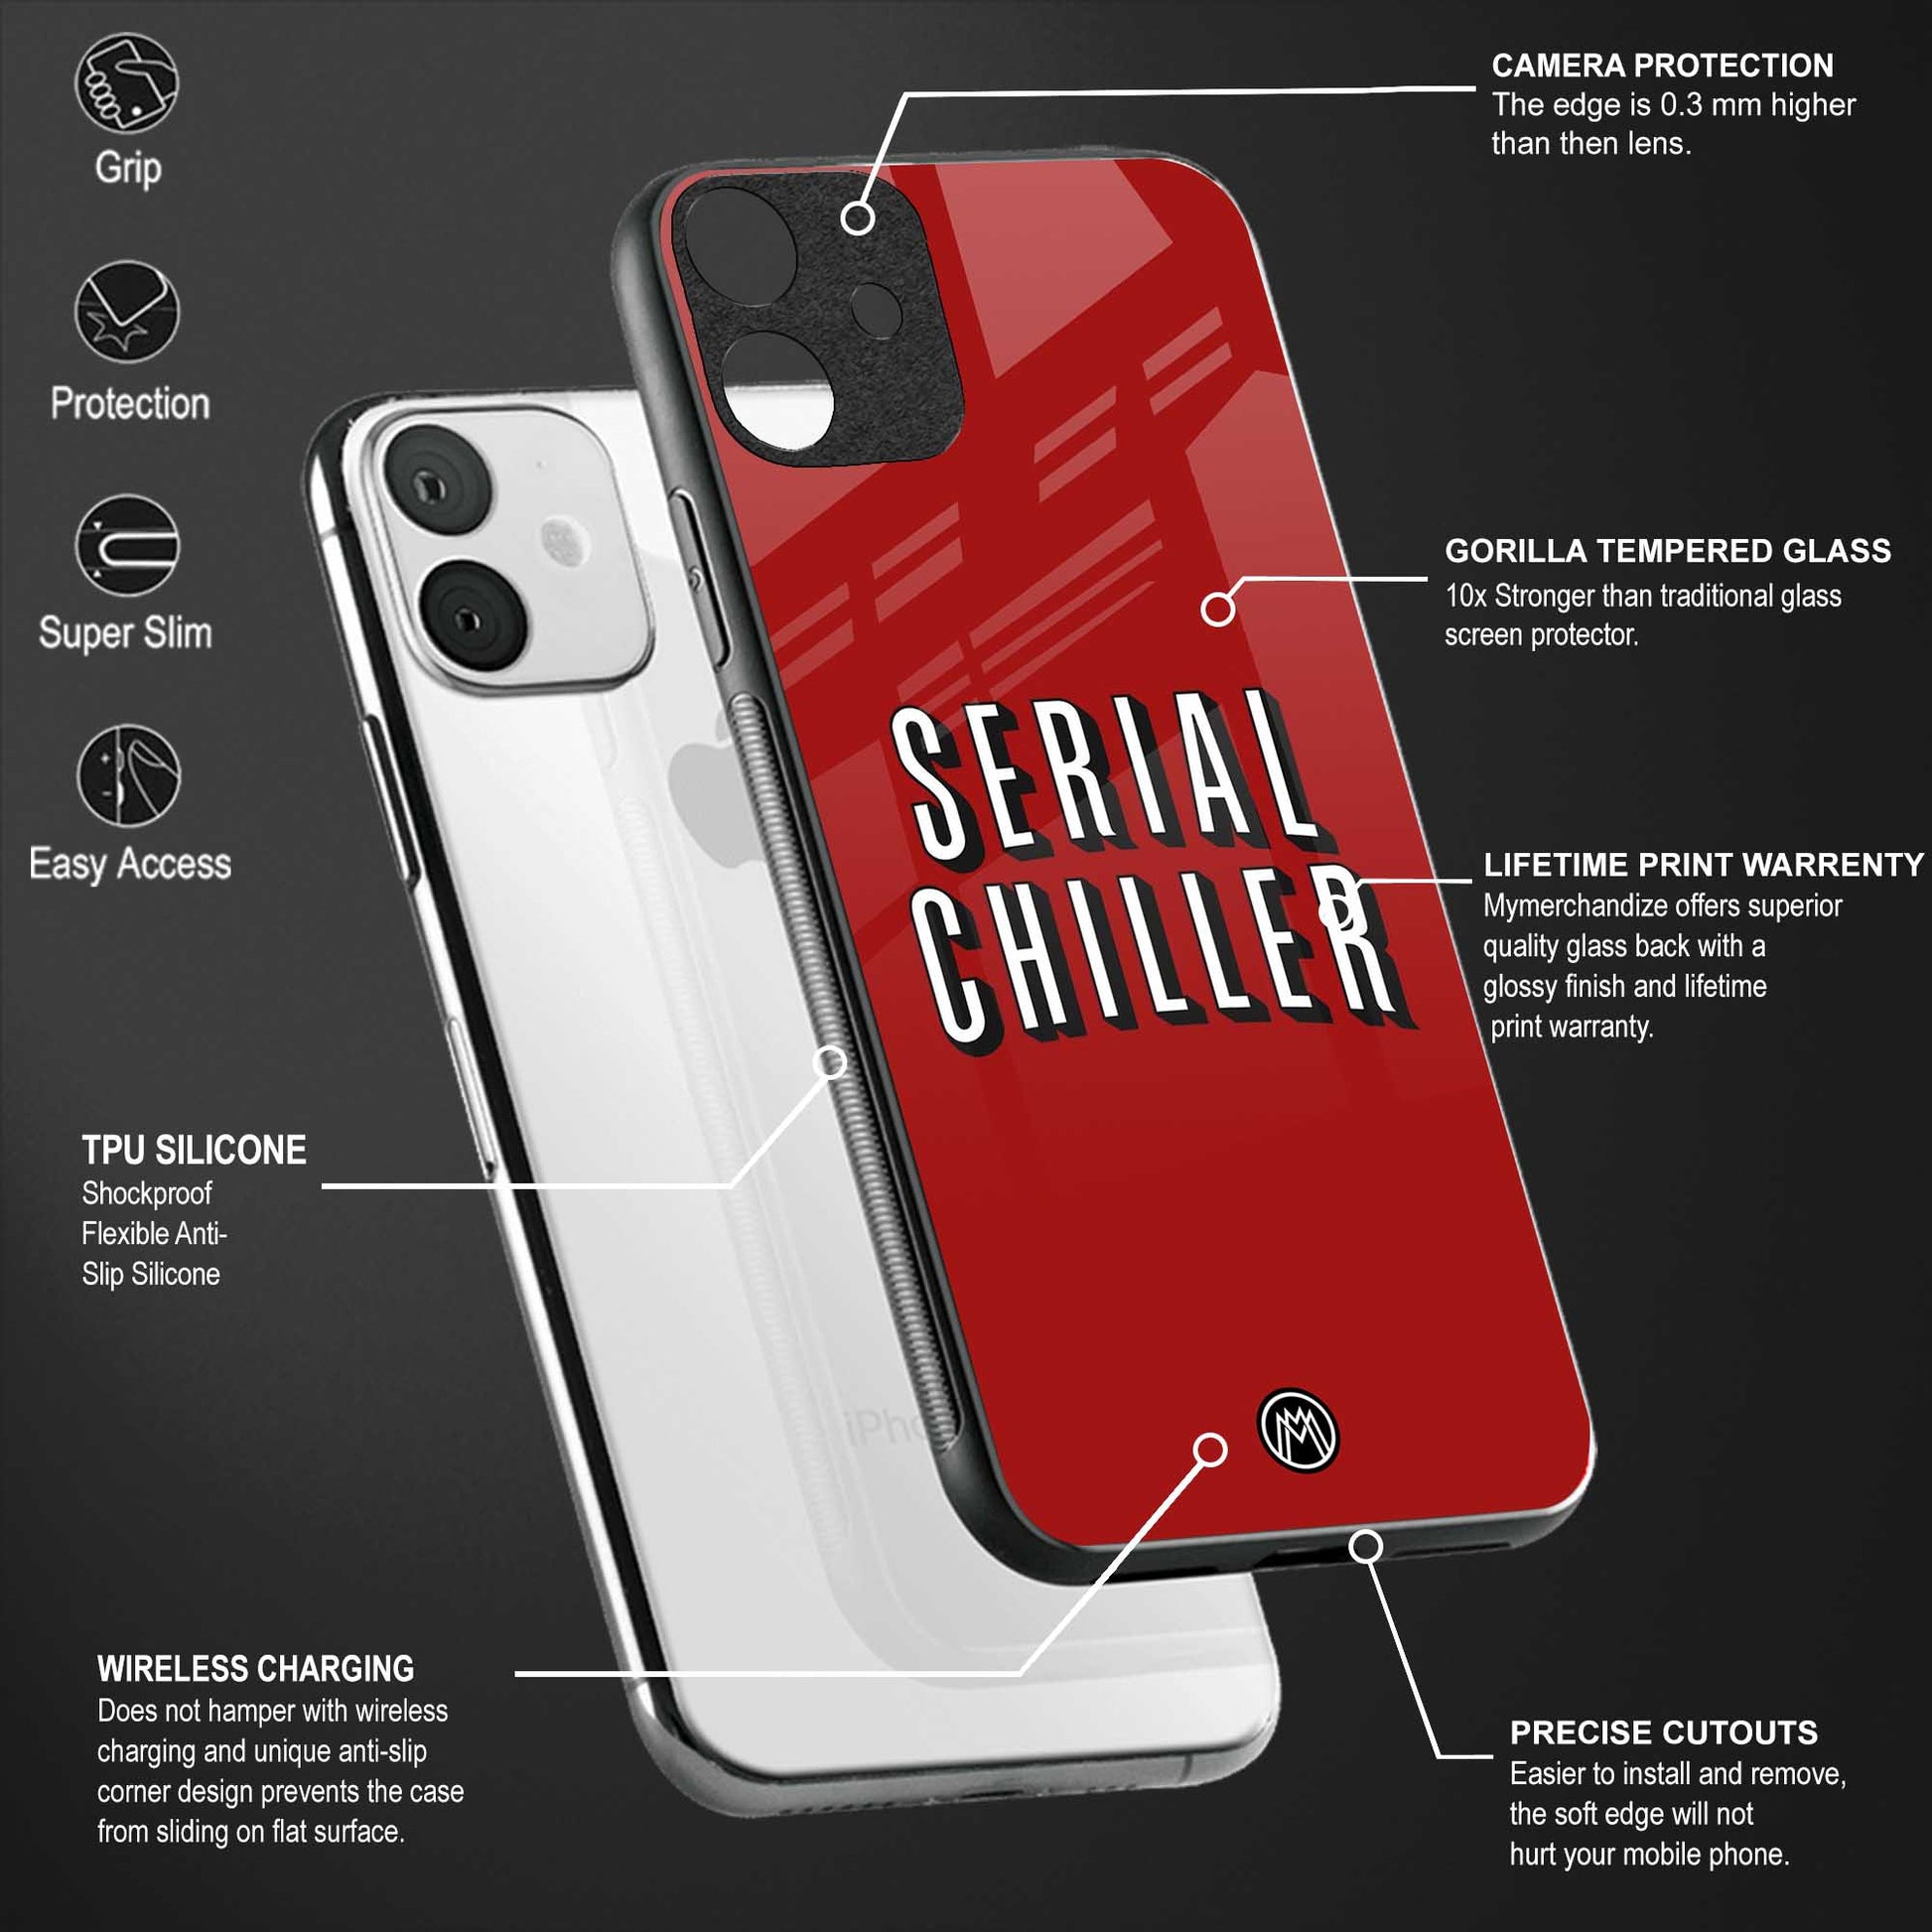 serial chiller netflix back phone cover | glass case for redmi note 11 pro plus 4g/5g